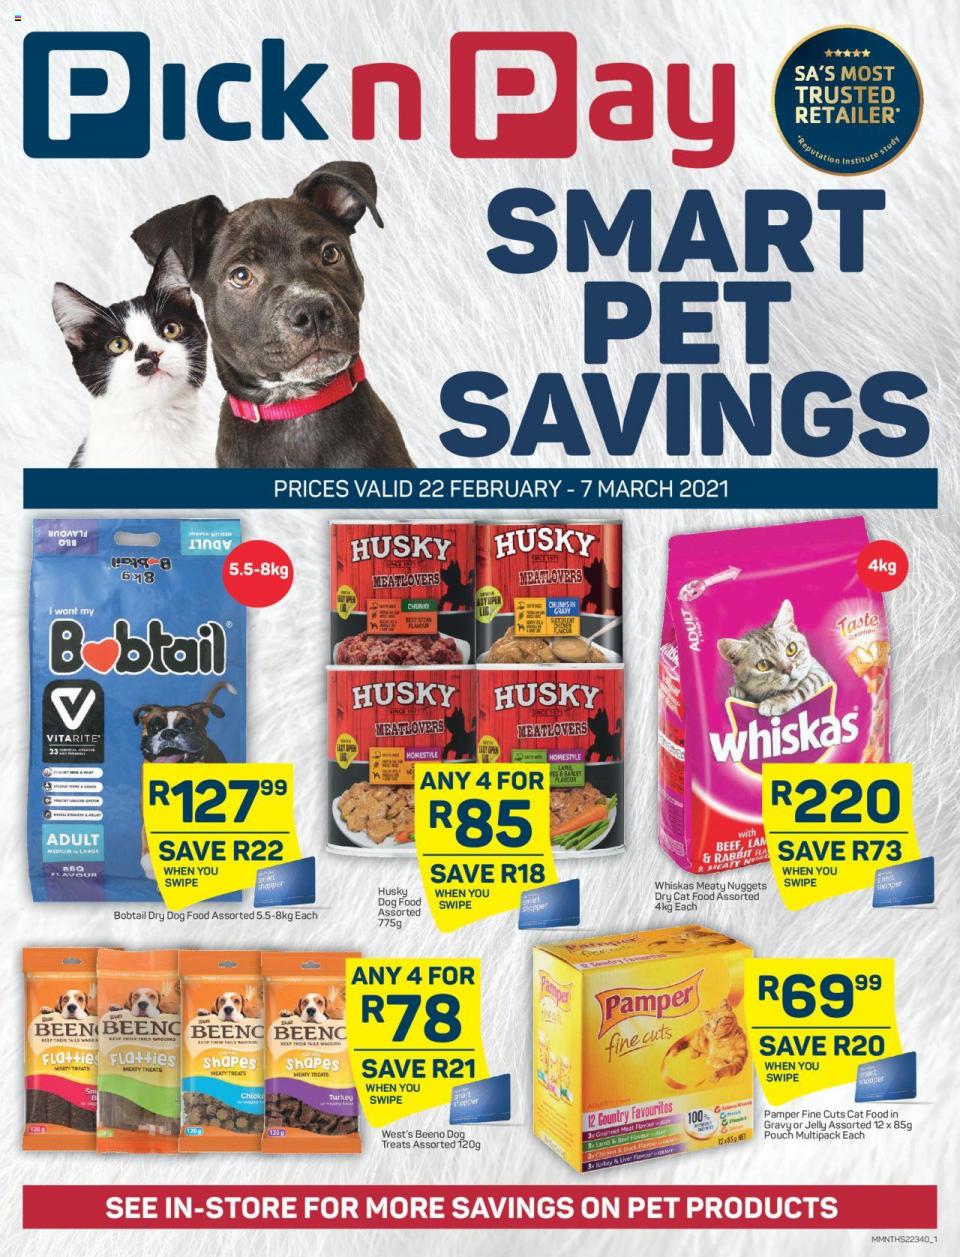 Pick n Pay Specials Pet Savings 22 February 2021